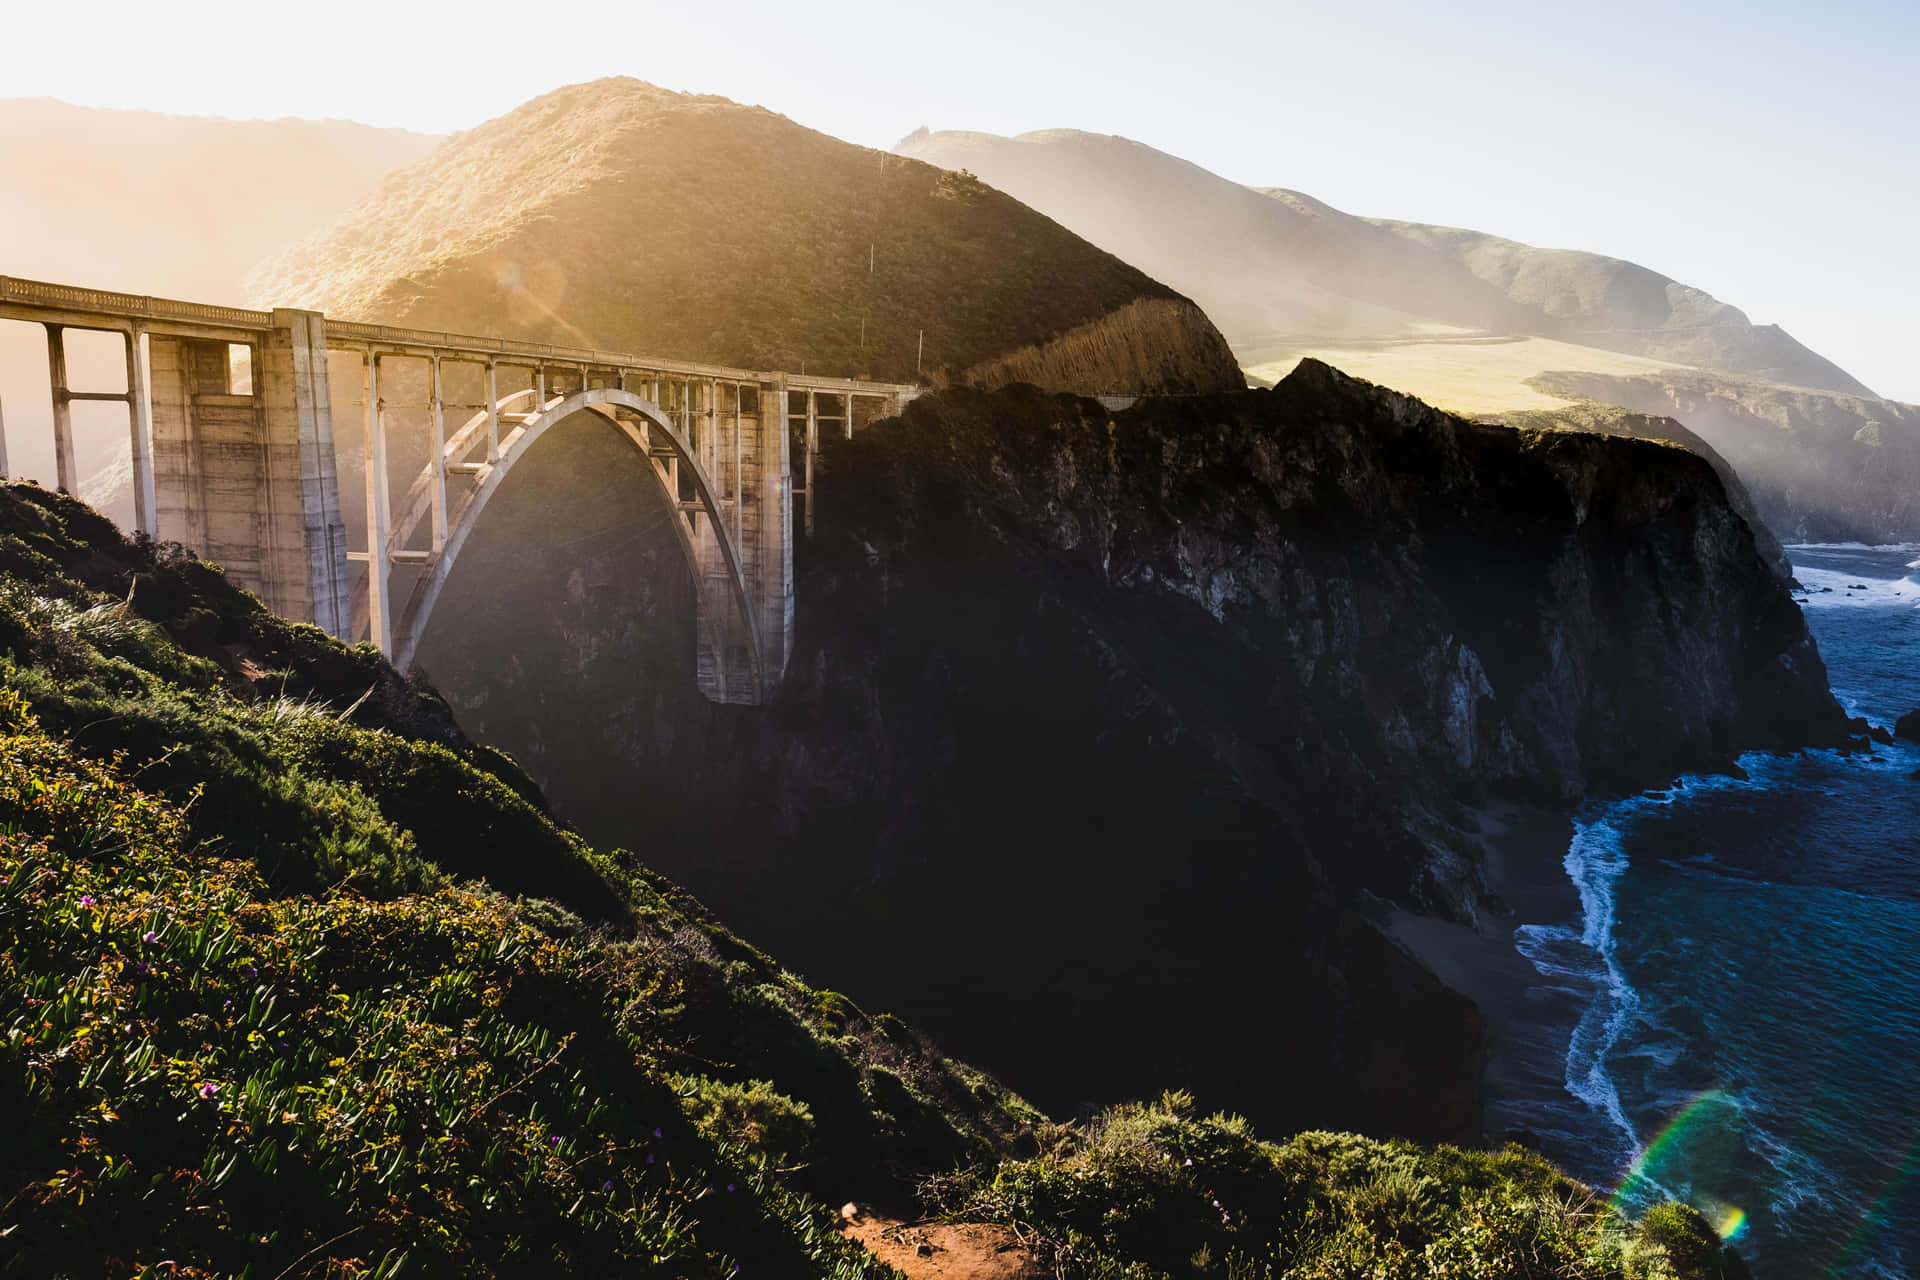 Take in the Beauty of Nature at Big Sur